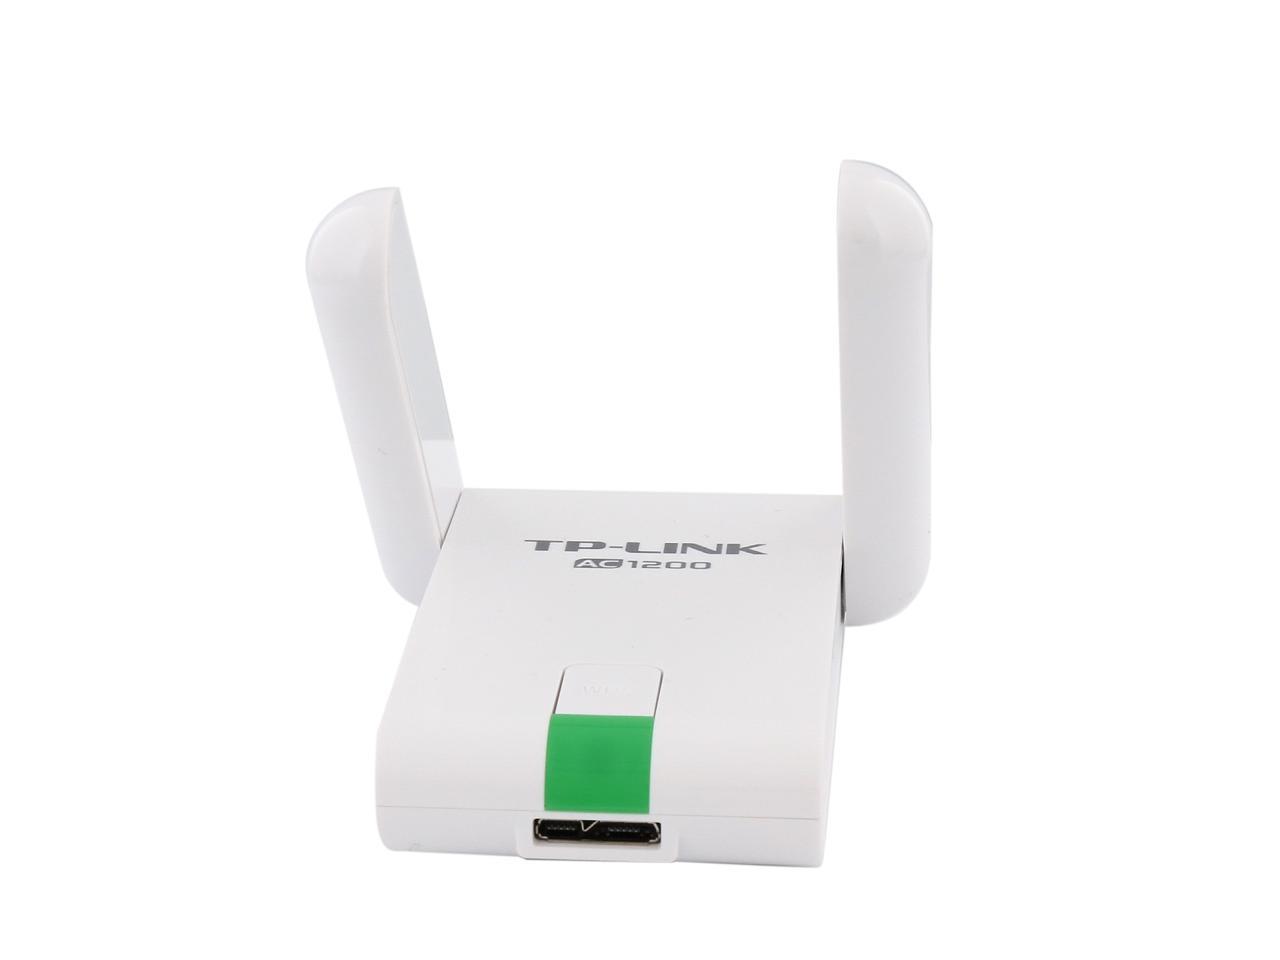 tp link wifi adapter drivers windows 20